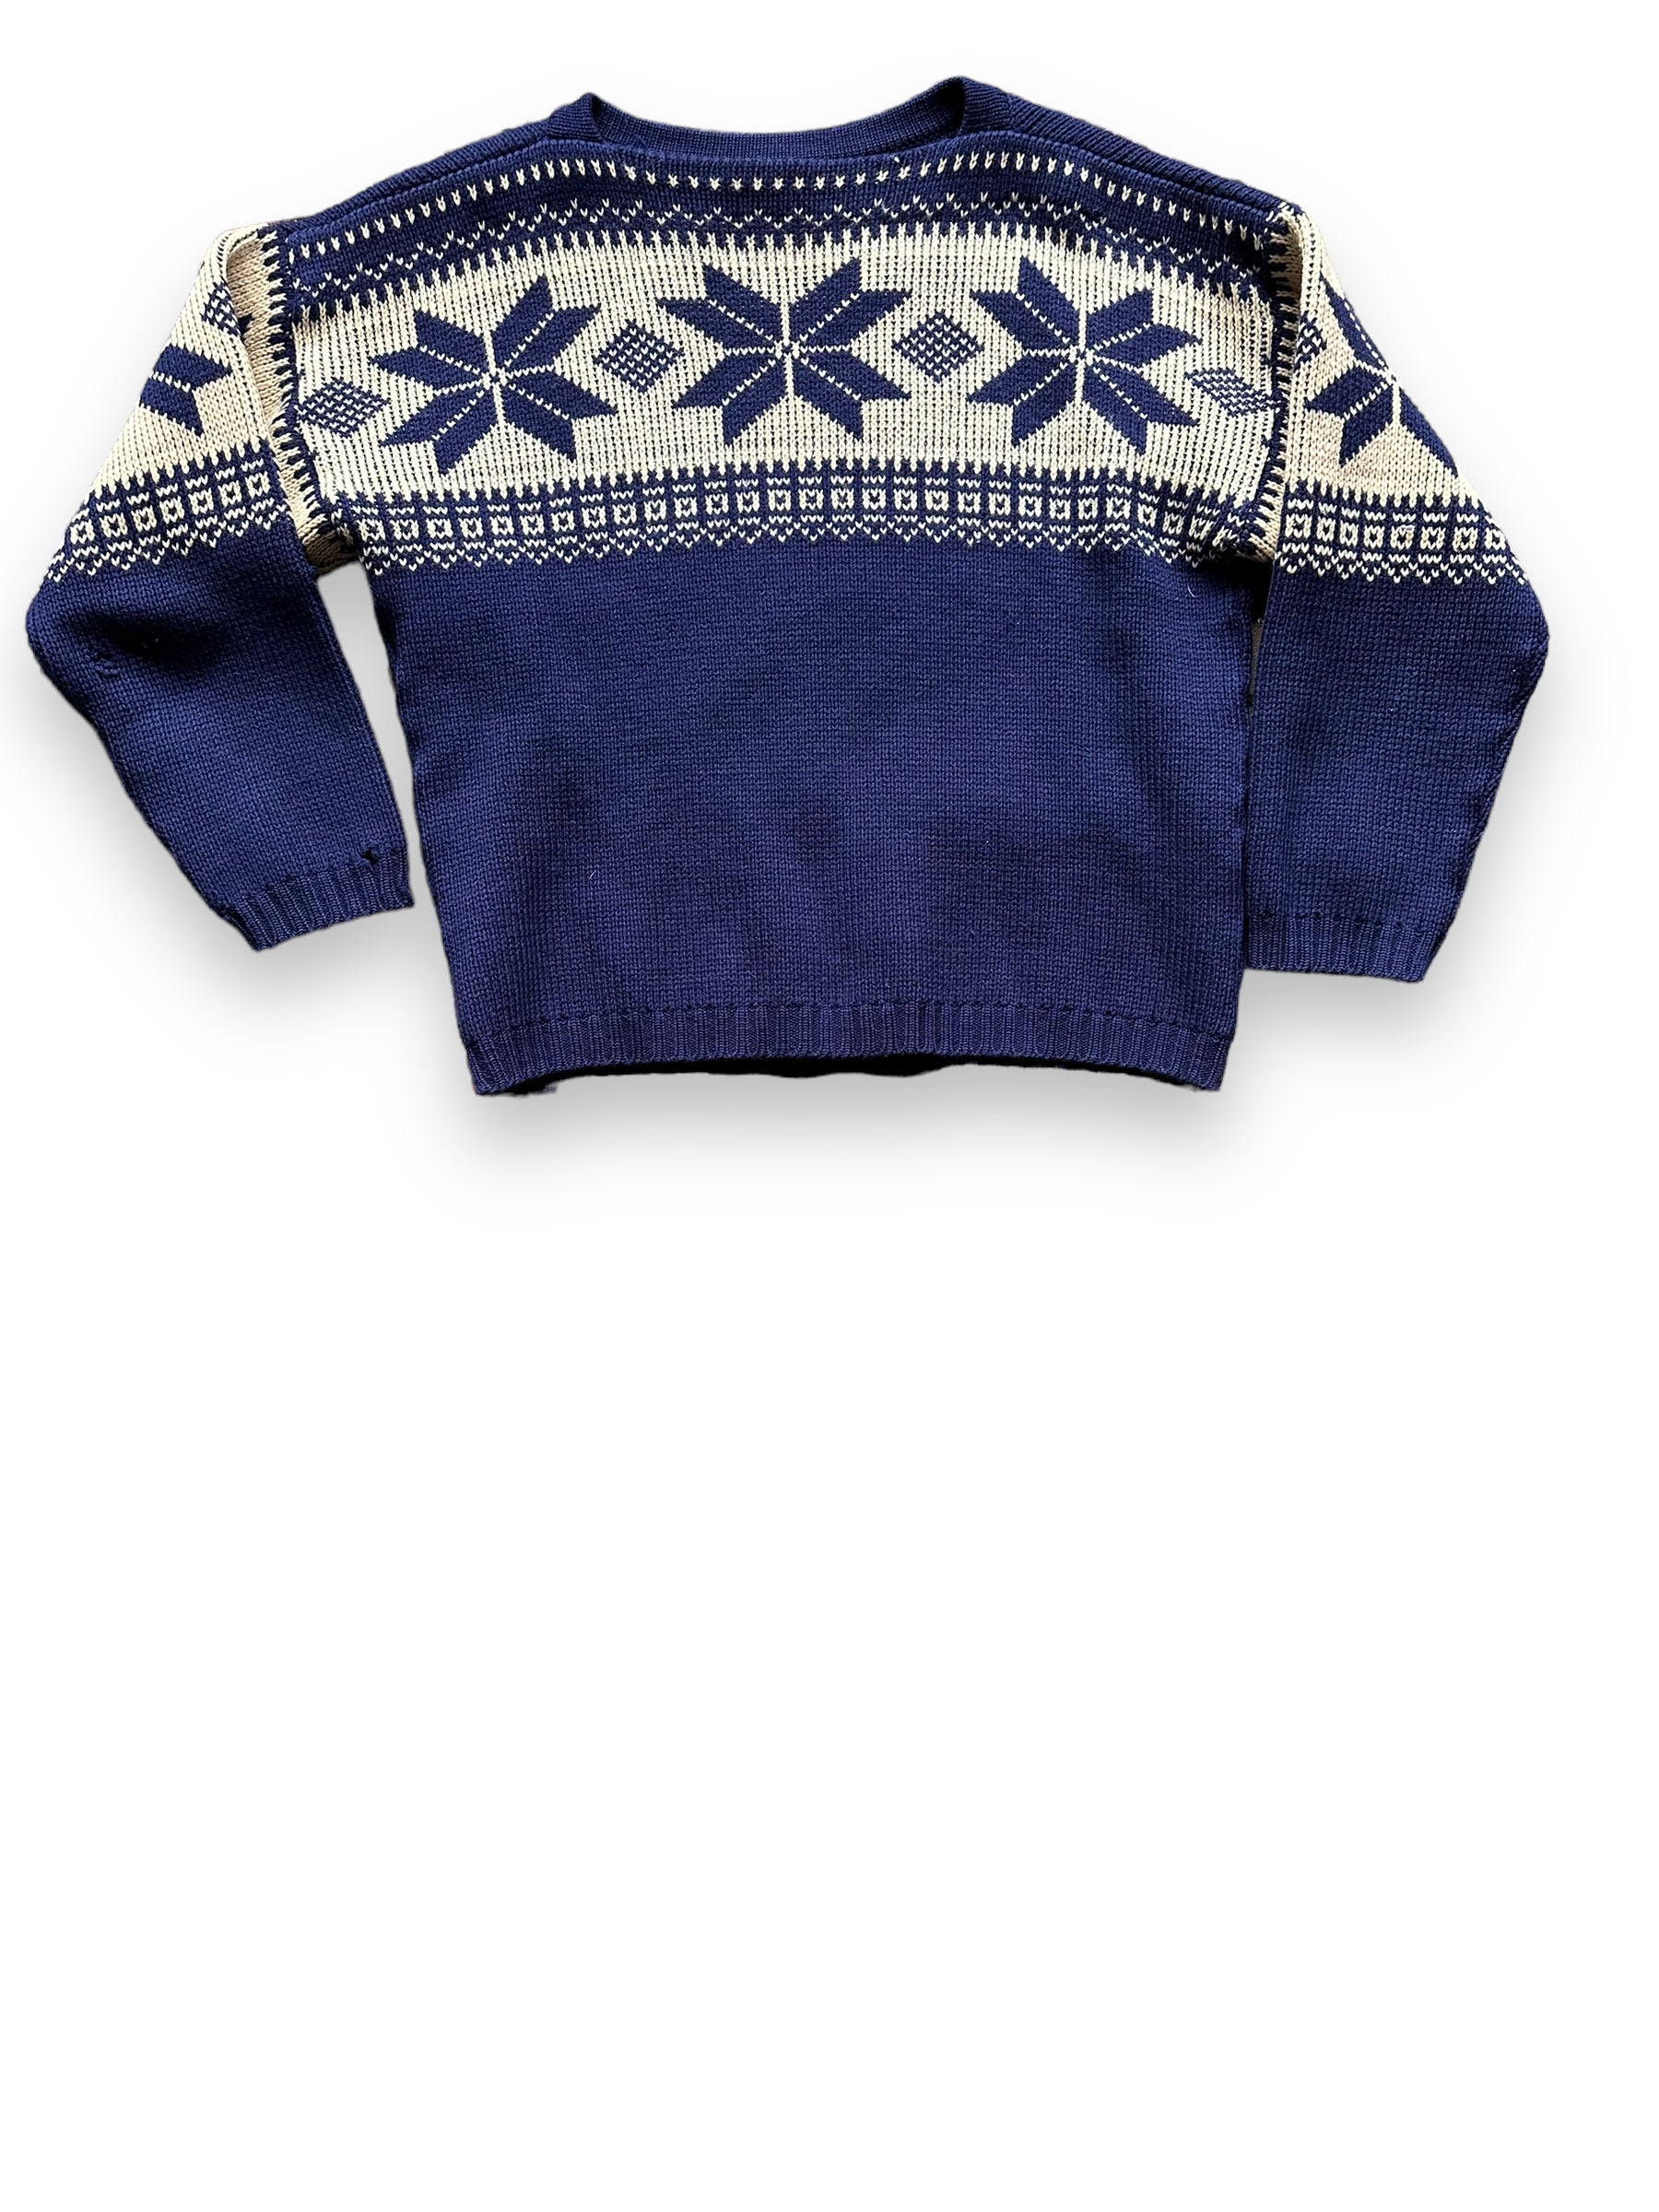 Front View of Vintage Sporthaus Schuster Ski Sweater | Barn Owl Vintage Seattle | Vintage Ski Sweater Seattle